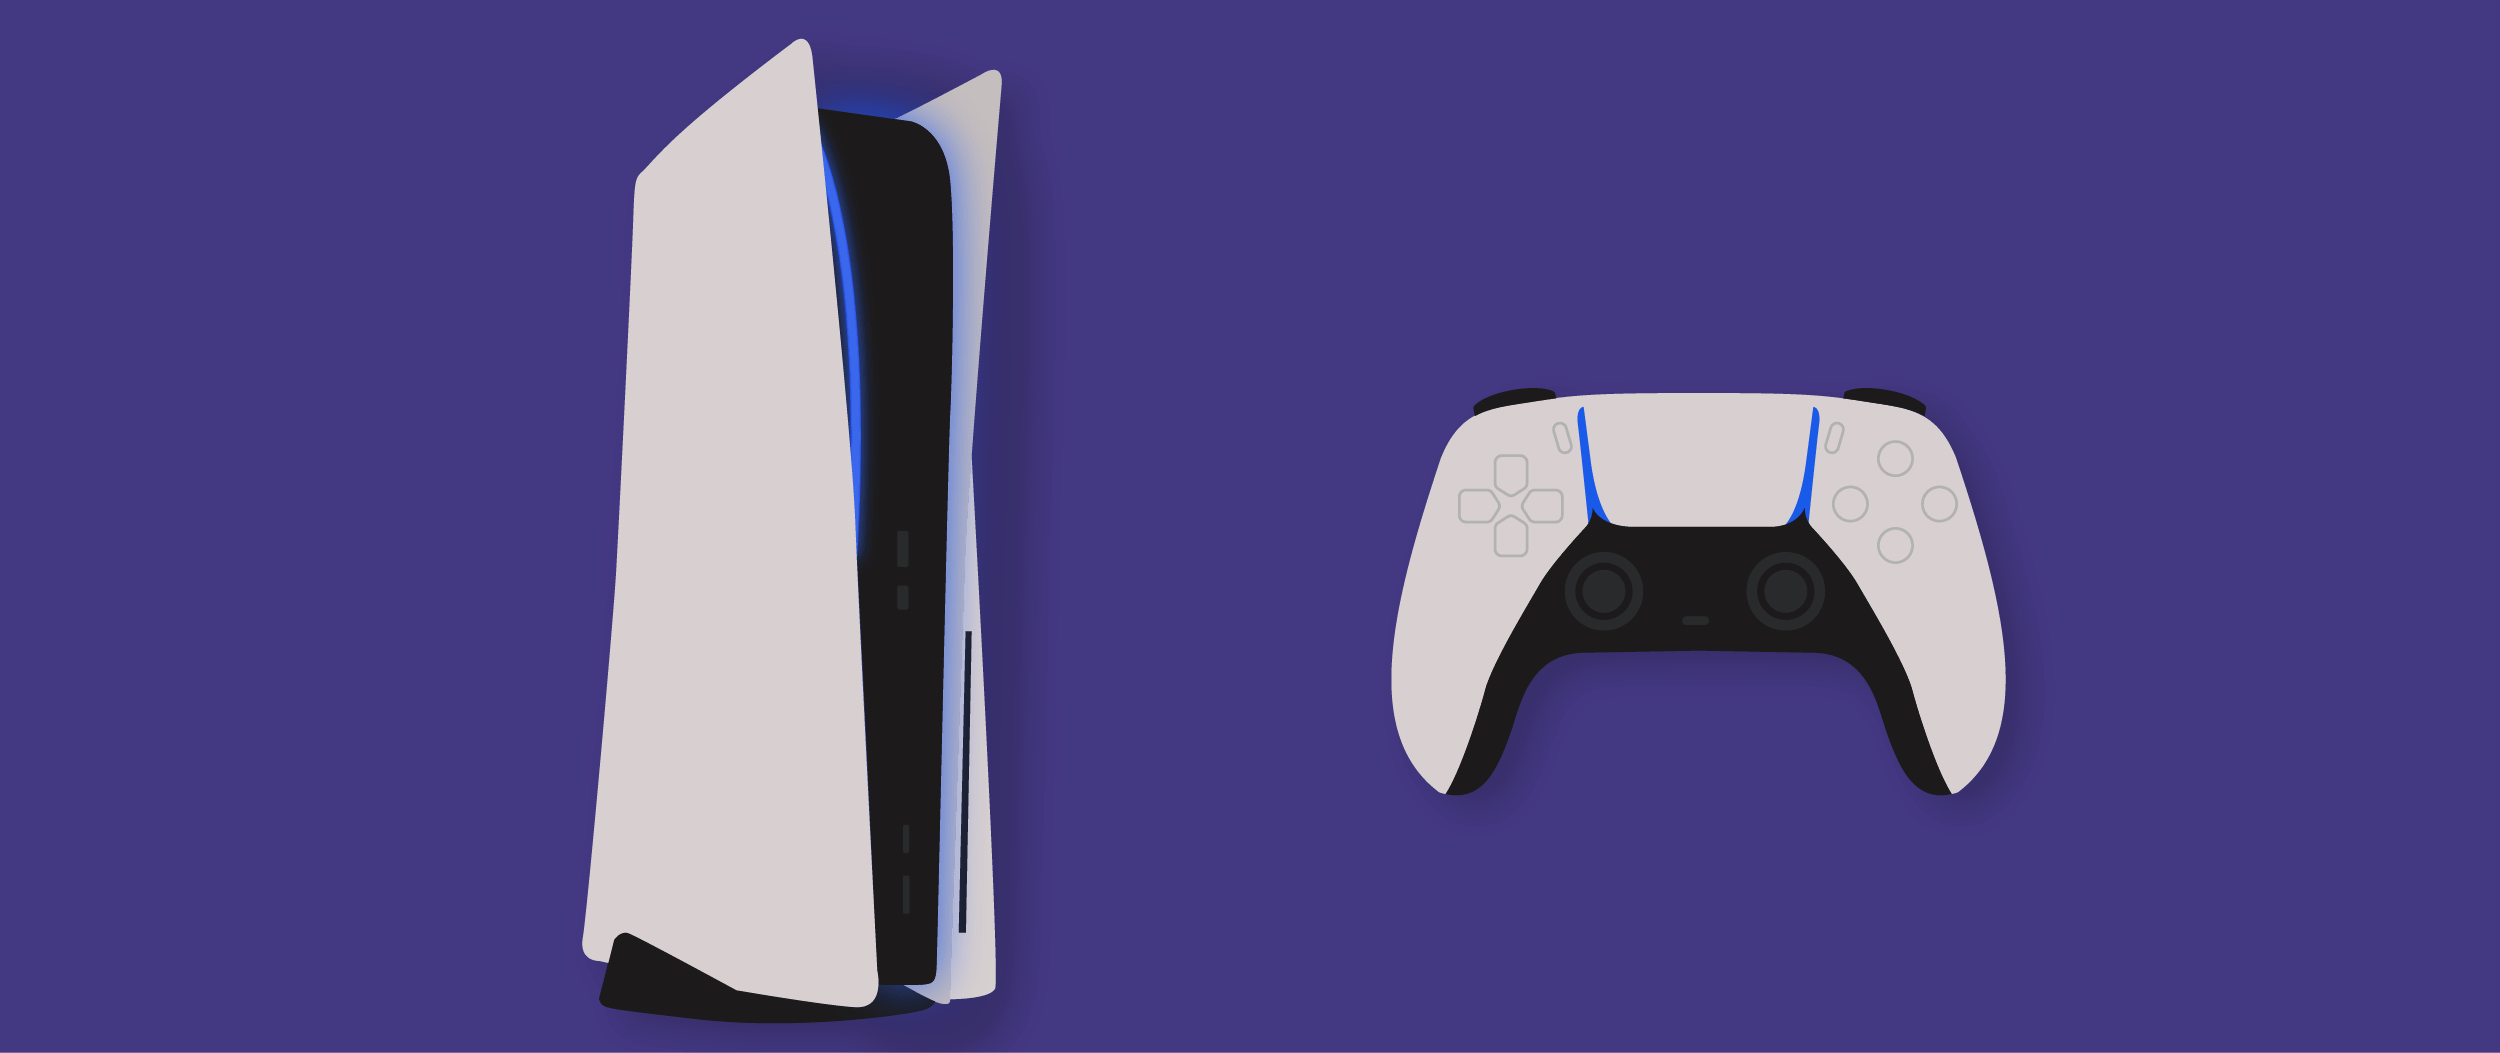 Banner graphic of the PS5 and PS5 controller